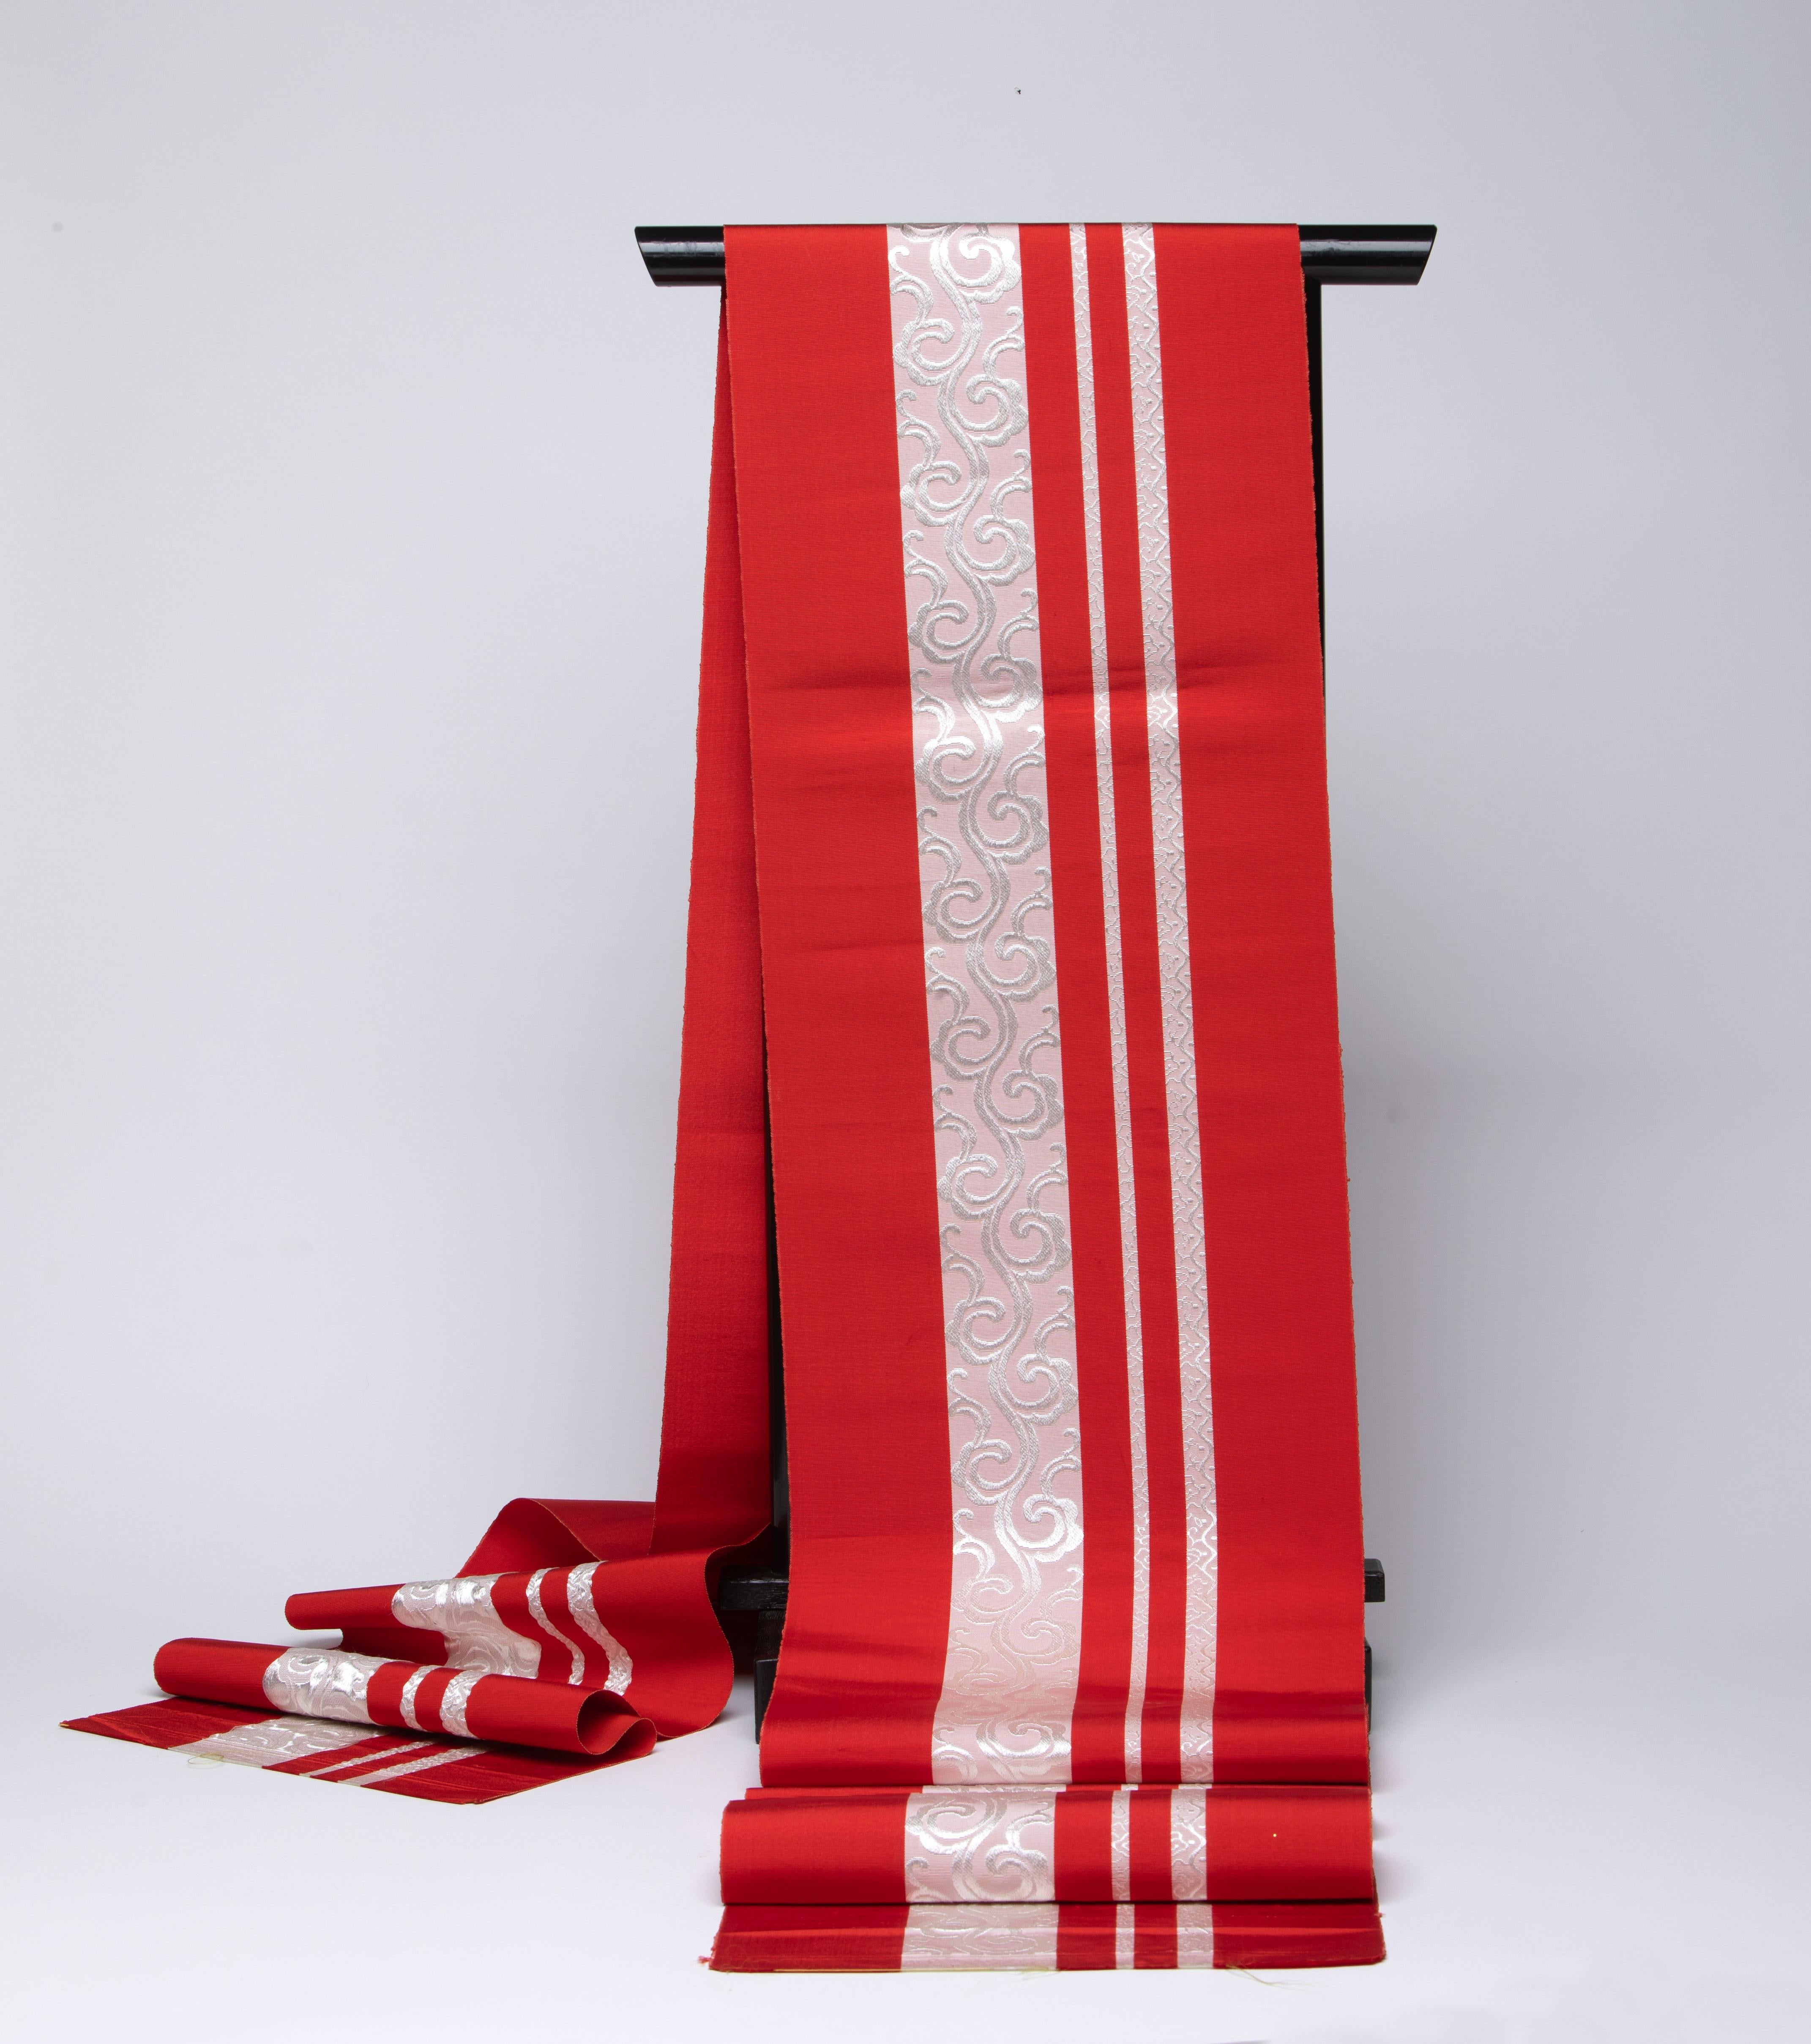 Red and White Brocade Design on a tightly Woven Fabric.
The Brocade Design running the entire length of 150 inches.
White Silk Thread Design is high-lighted on the Red Fabric.
Wonderful hanging on a wall or as a table runner for the holiday